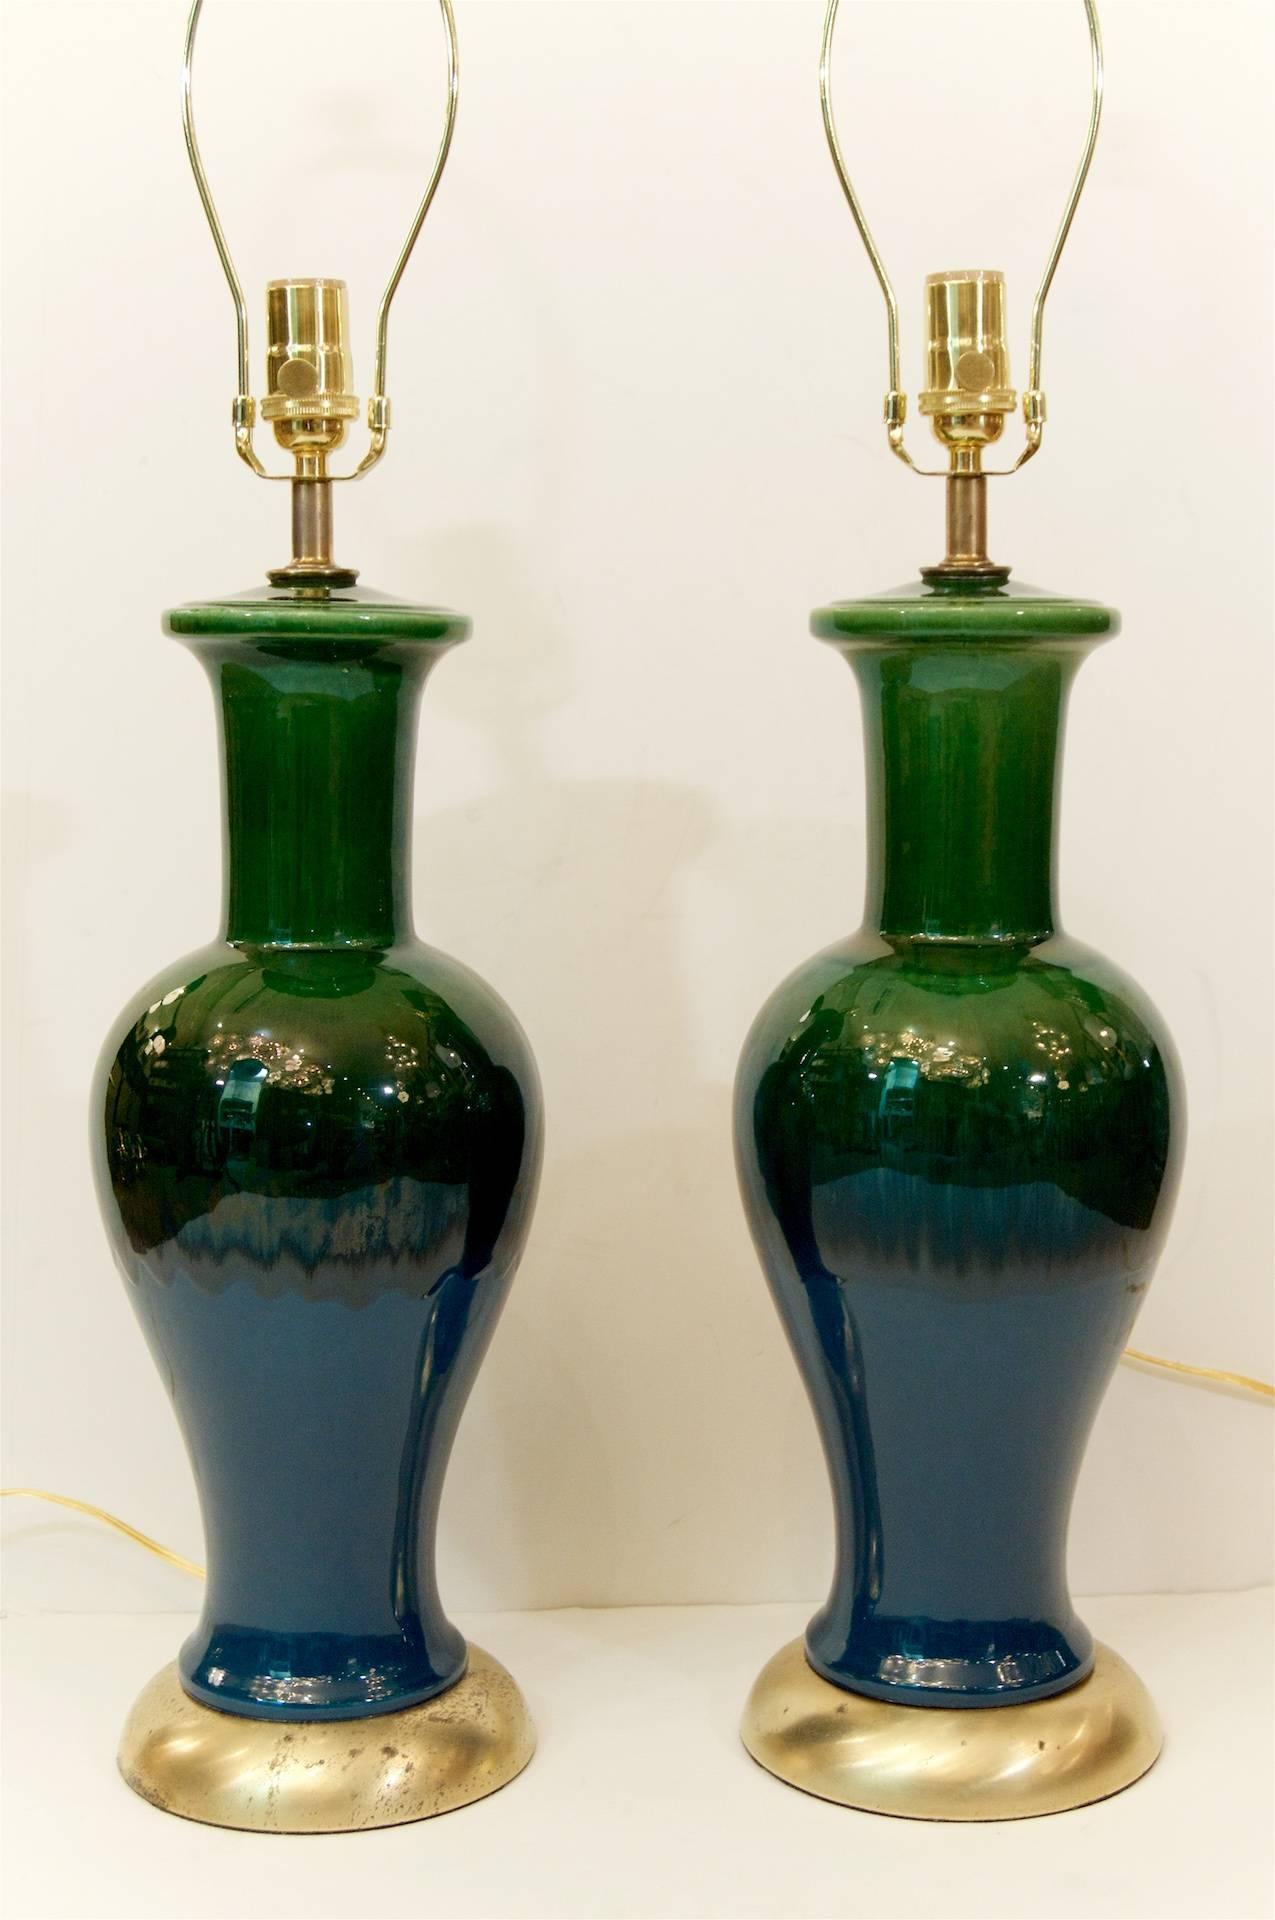 Excellent pair of elegantly formed Mid-Century glazed ceramic lamps, with gilt hardware. Some variations in glaze pattern exist between the lamps.

Height listed is to the top of a 9 inch harp, height to the top of the socket is 23 inches.